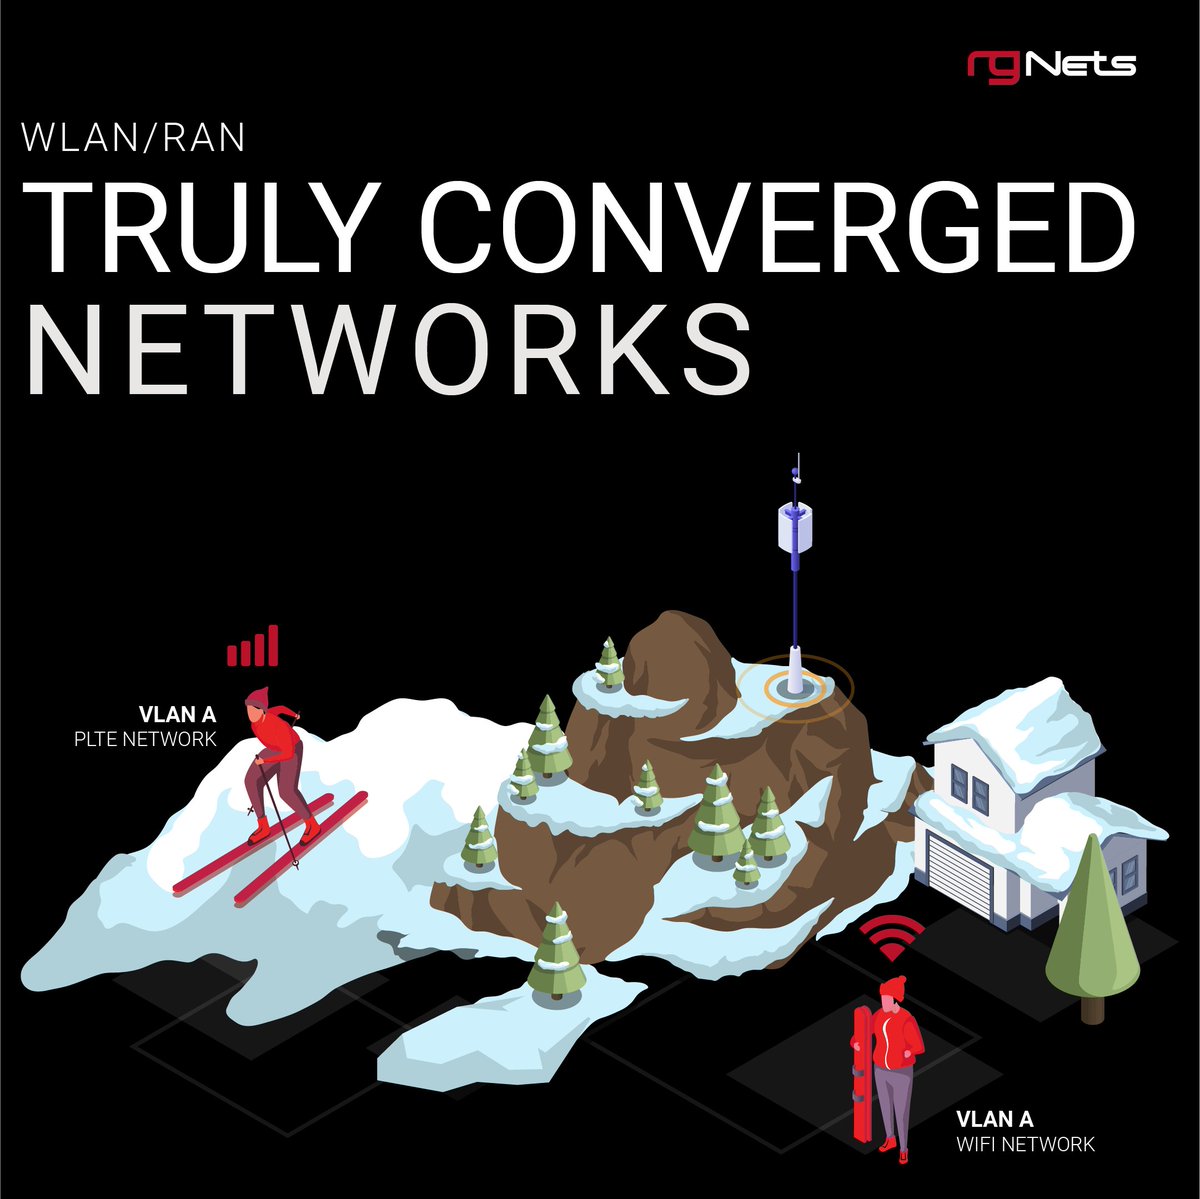 Think that WLAN/PLTE convergence is just marketing? Let us show you that it’s a reality, today.  Get in touch to find out about opportunities for a live demonstration!
@ruckusnetworks #PrivateLTE #PLTE #privatenetworks #RAN